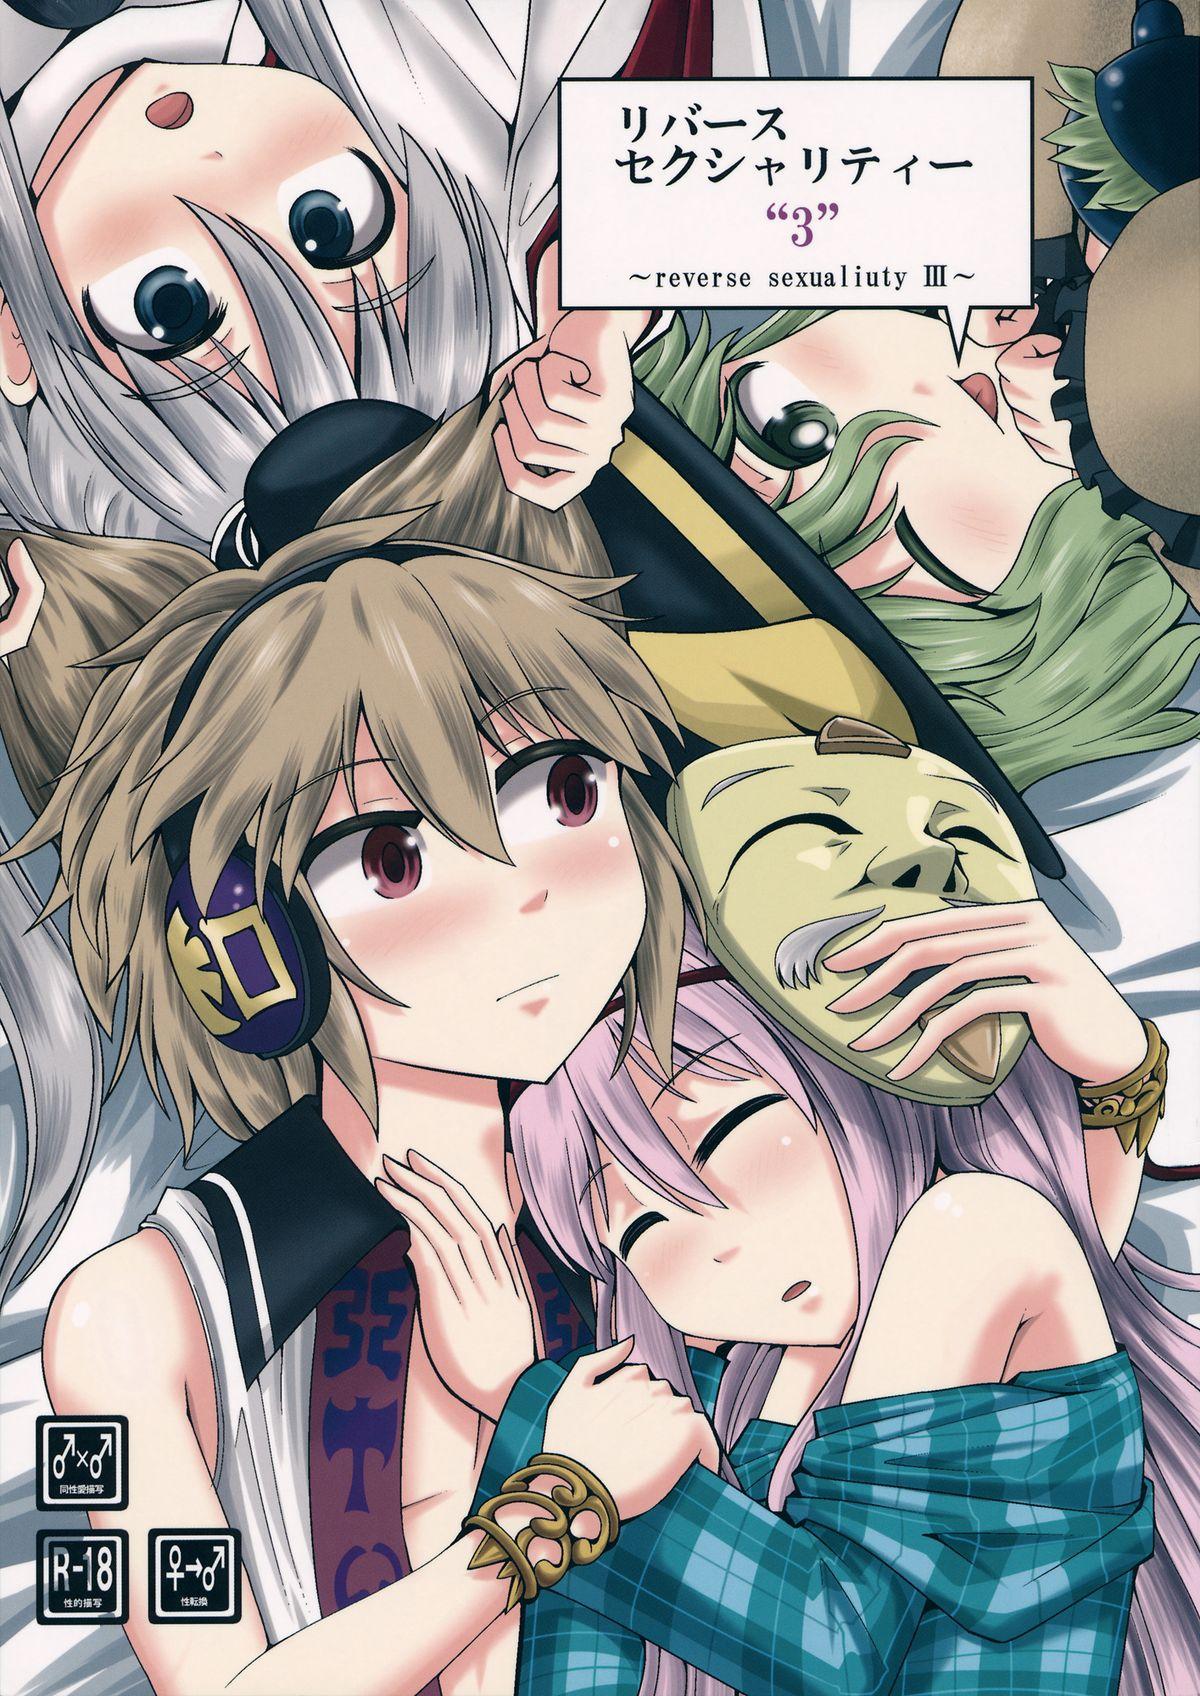 Bribe Reverse Sexuality 3 - Touhou project Stud - Picture 1